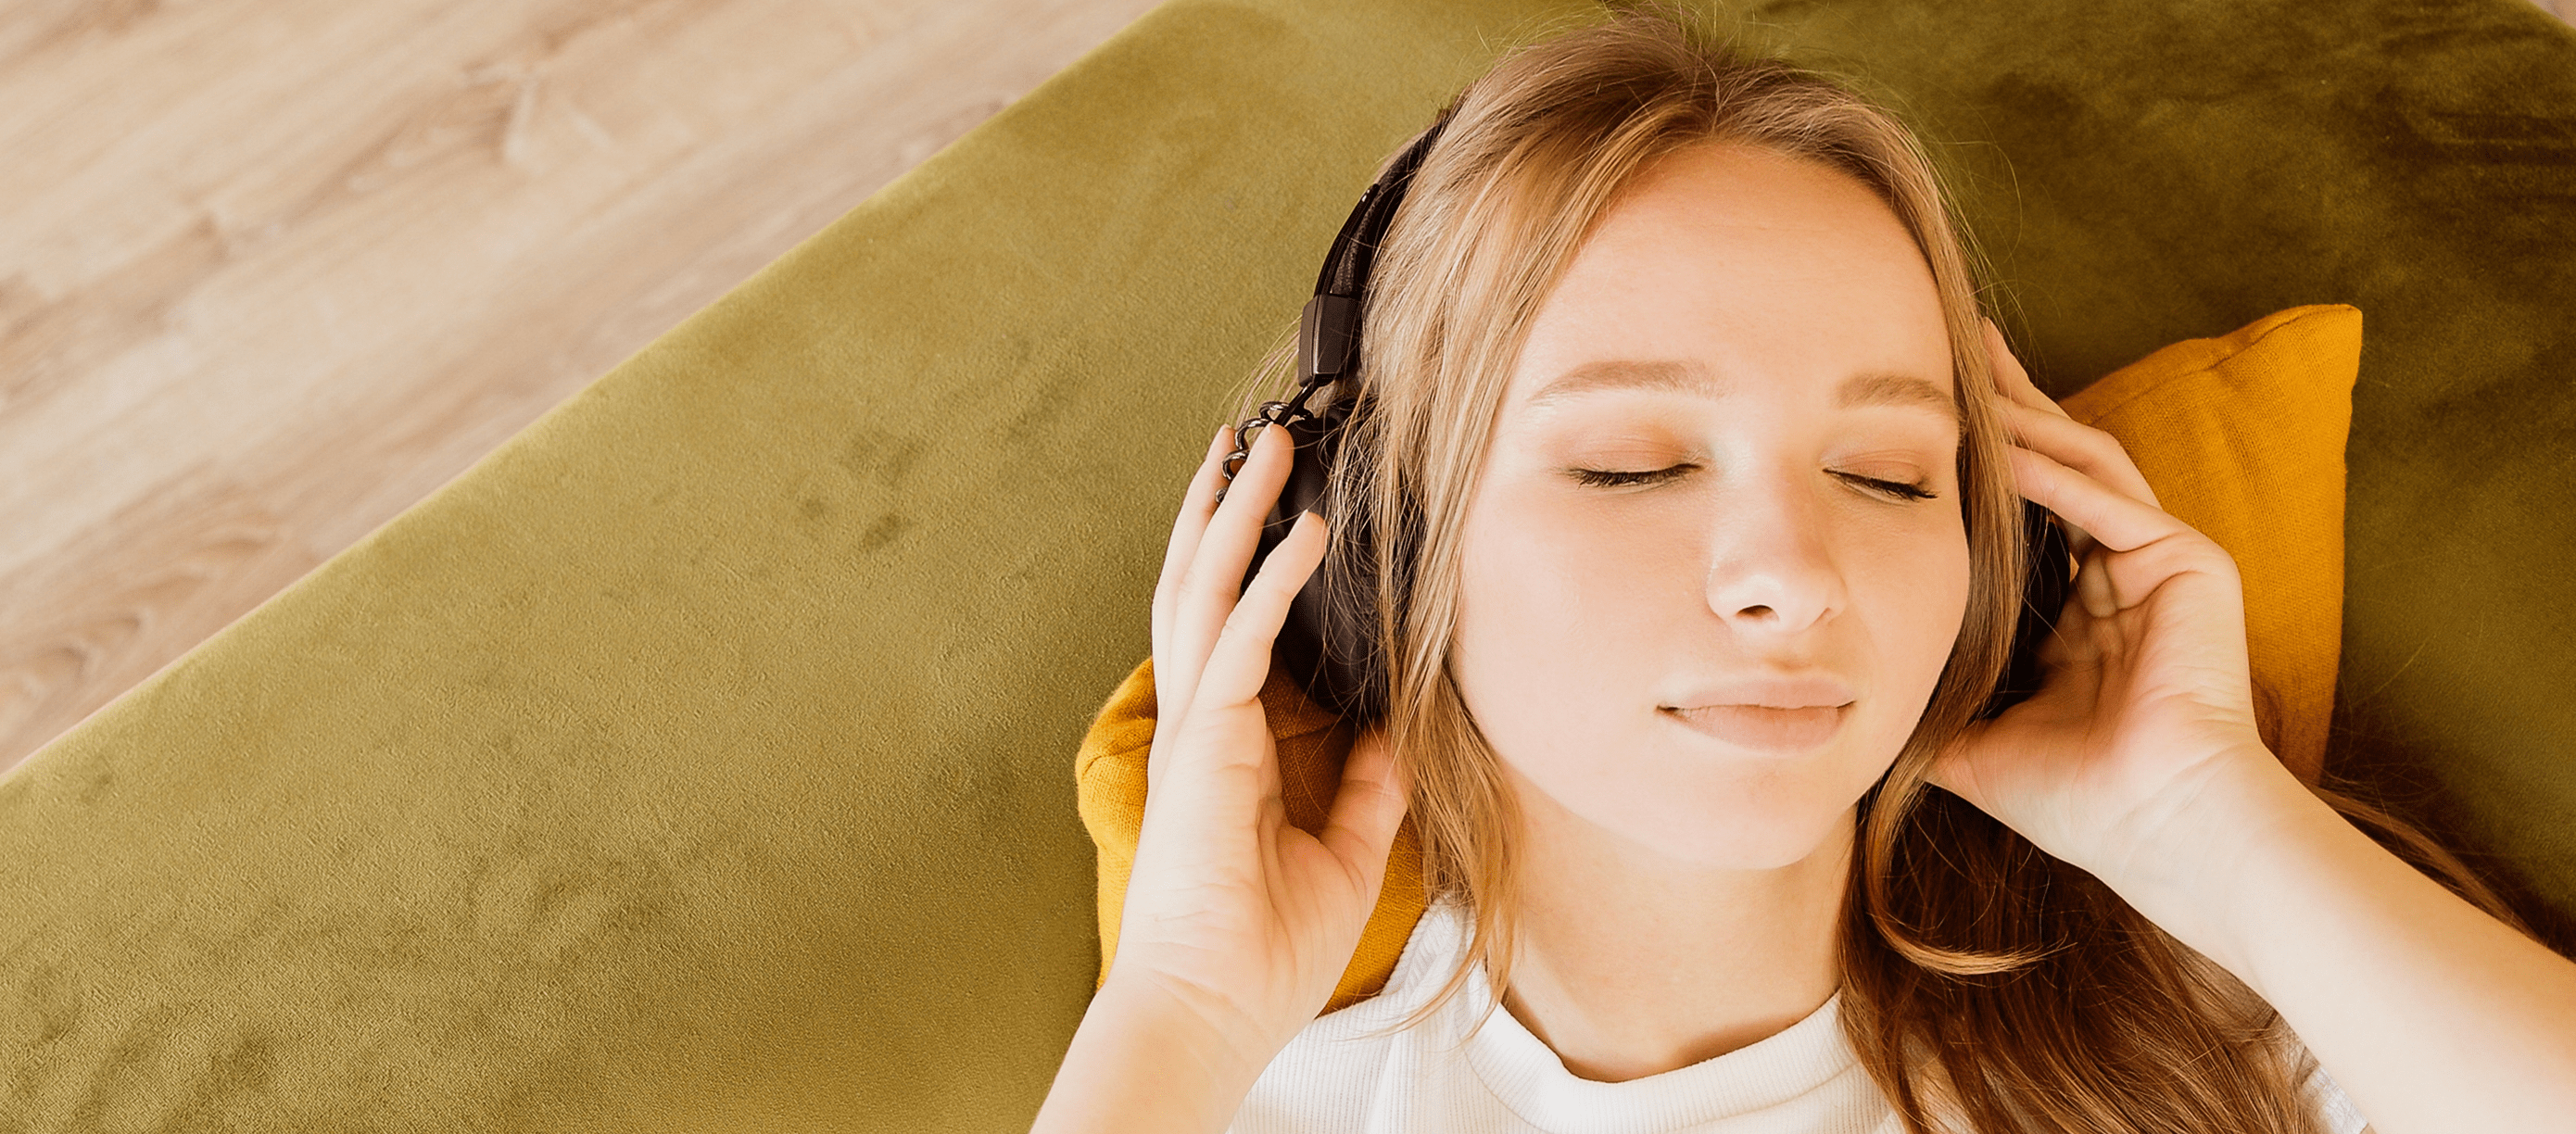 A woman is listening to music while laying on a couch.